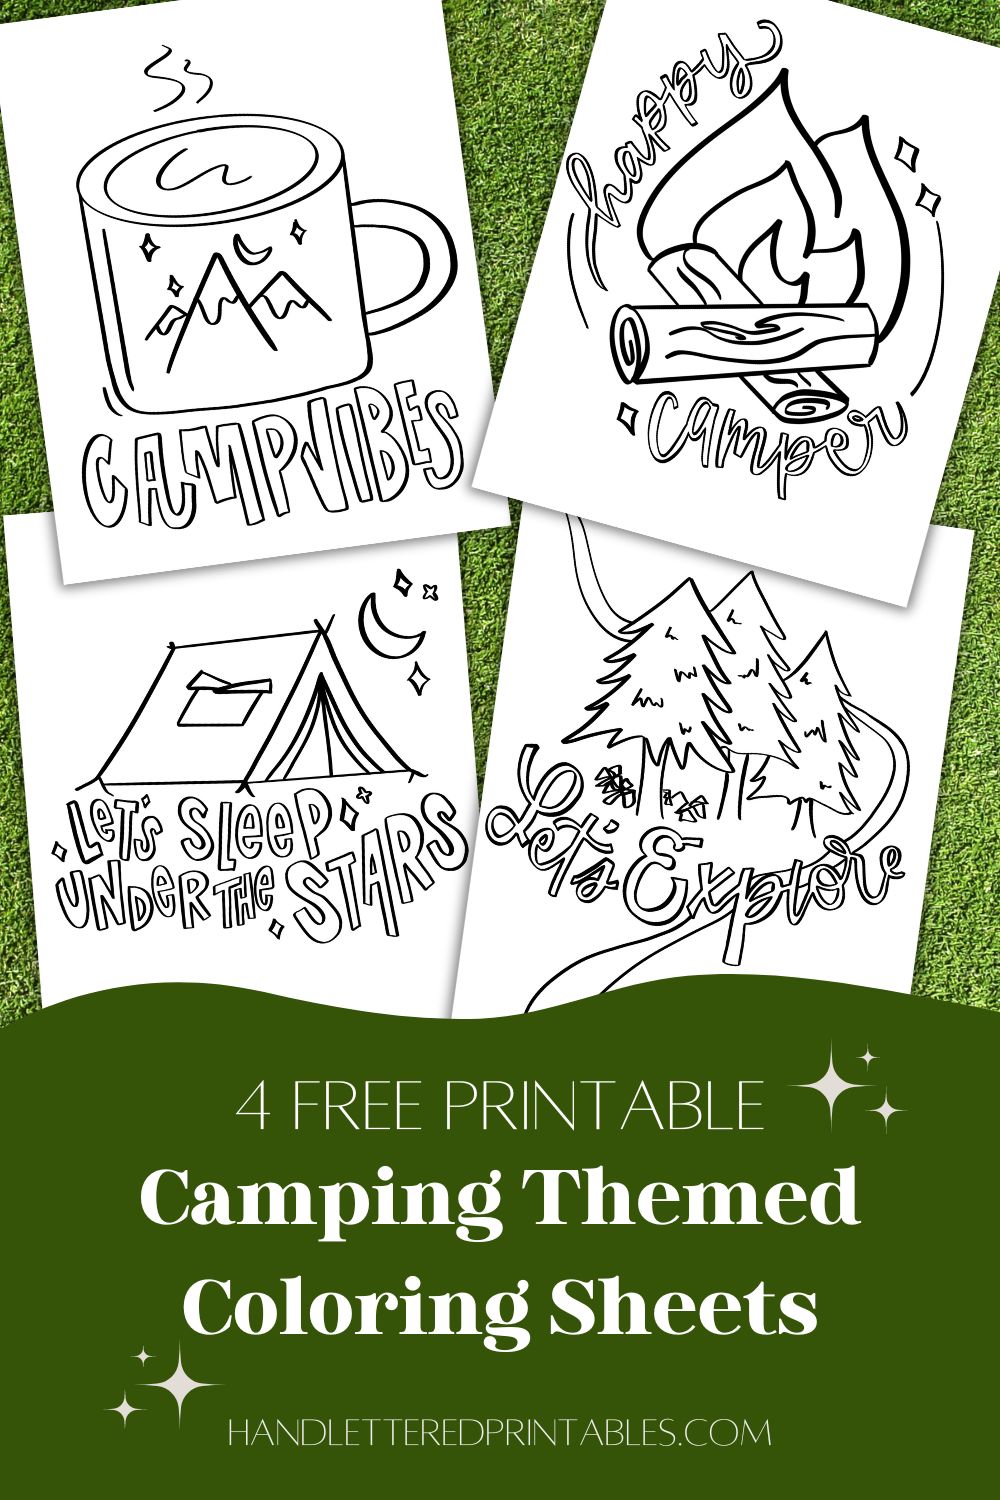 4 camping coloring sheets on grass turf. Coloring sheets designed with chunky brush lettering style with hand lettered phrases like 'camp vibes', 'happy camper' 'let's sleep under the stars' and 'let's explore' with line illustrations ready for coloring of a camp mug, campfire, tent under the night sky and trees with hiking trail. Text over reads: 4 free printable camping themed coloring sheets